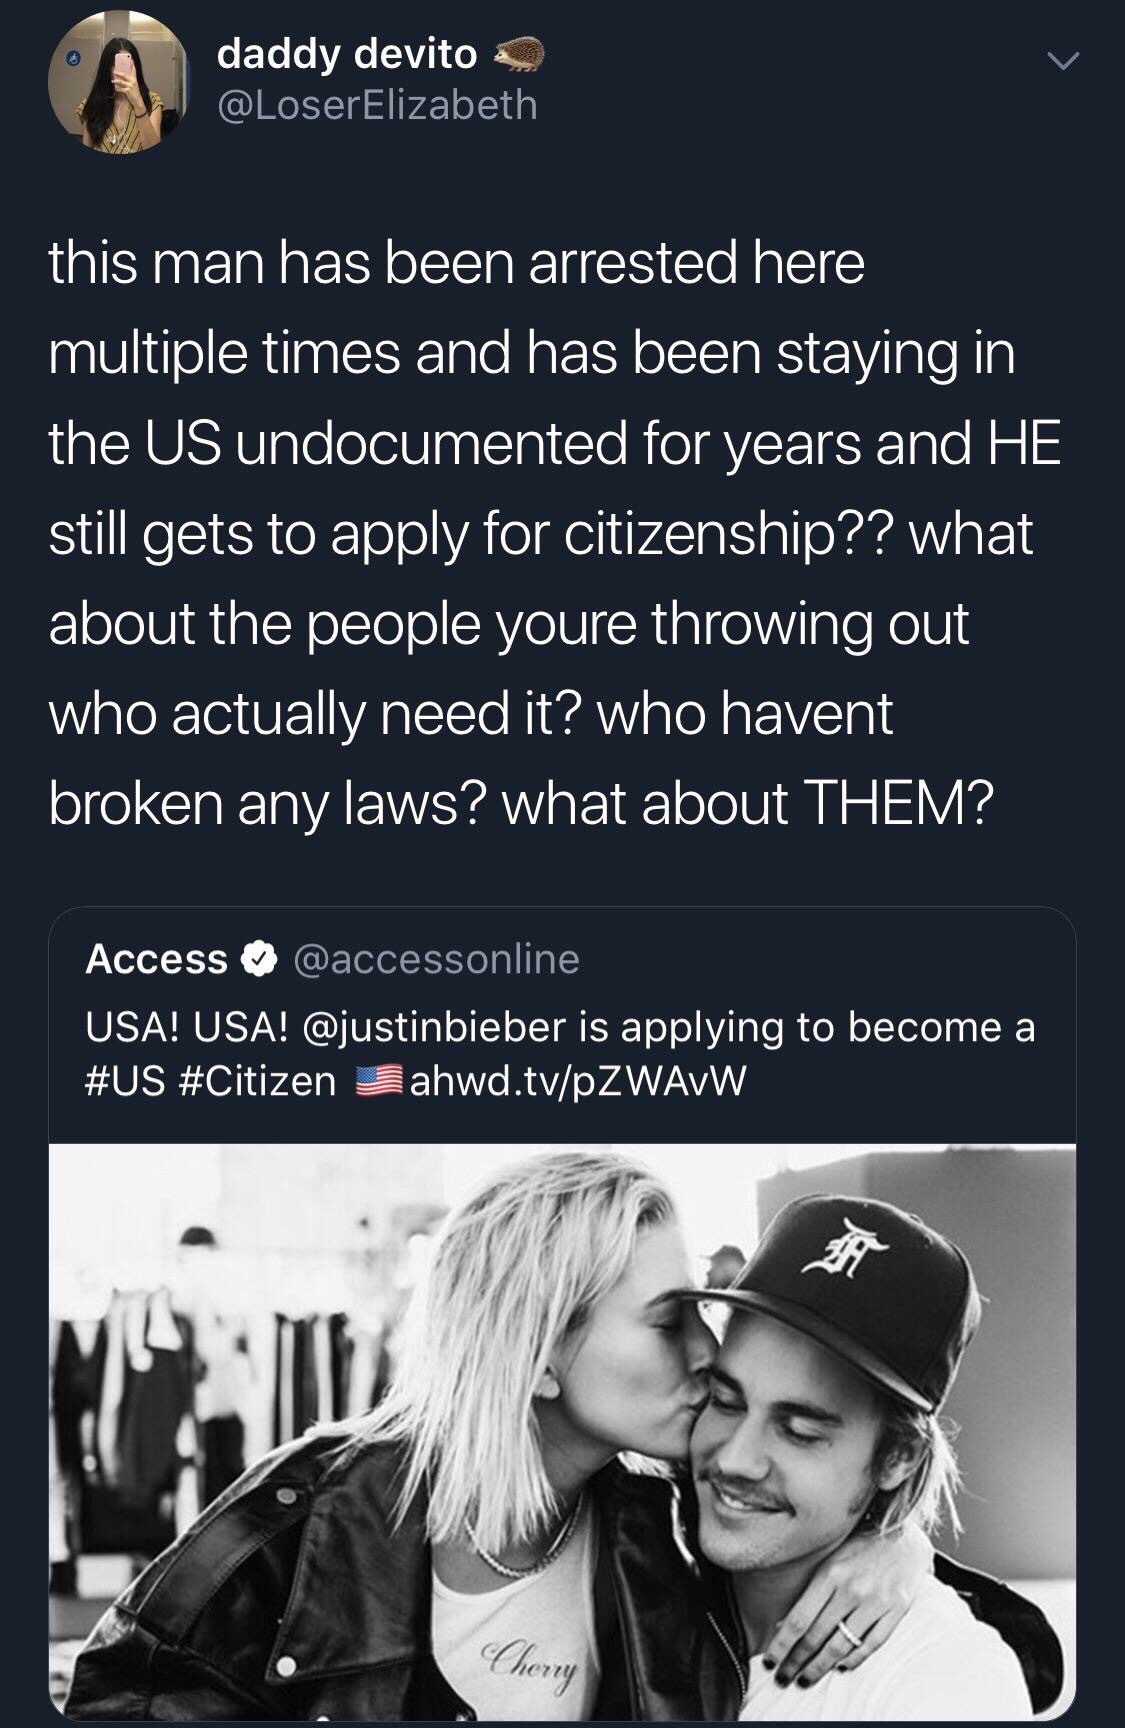 memes - justin bieber selena gomez 2019 - daddy devito this man has been arrested here multiple times and has been staying in the Us undocumented for years and He still gets to apply for citizenship?? what about the people youre throwing out who actually 